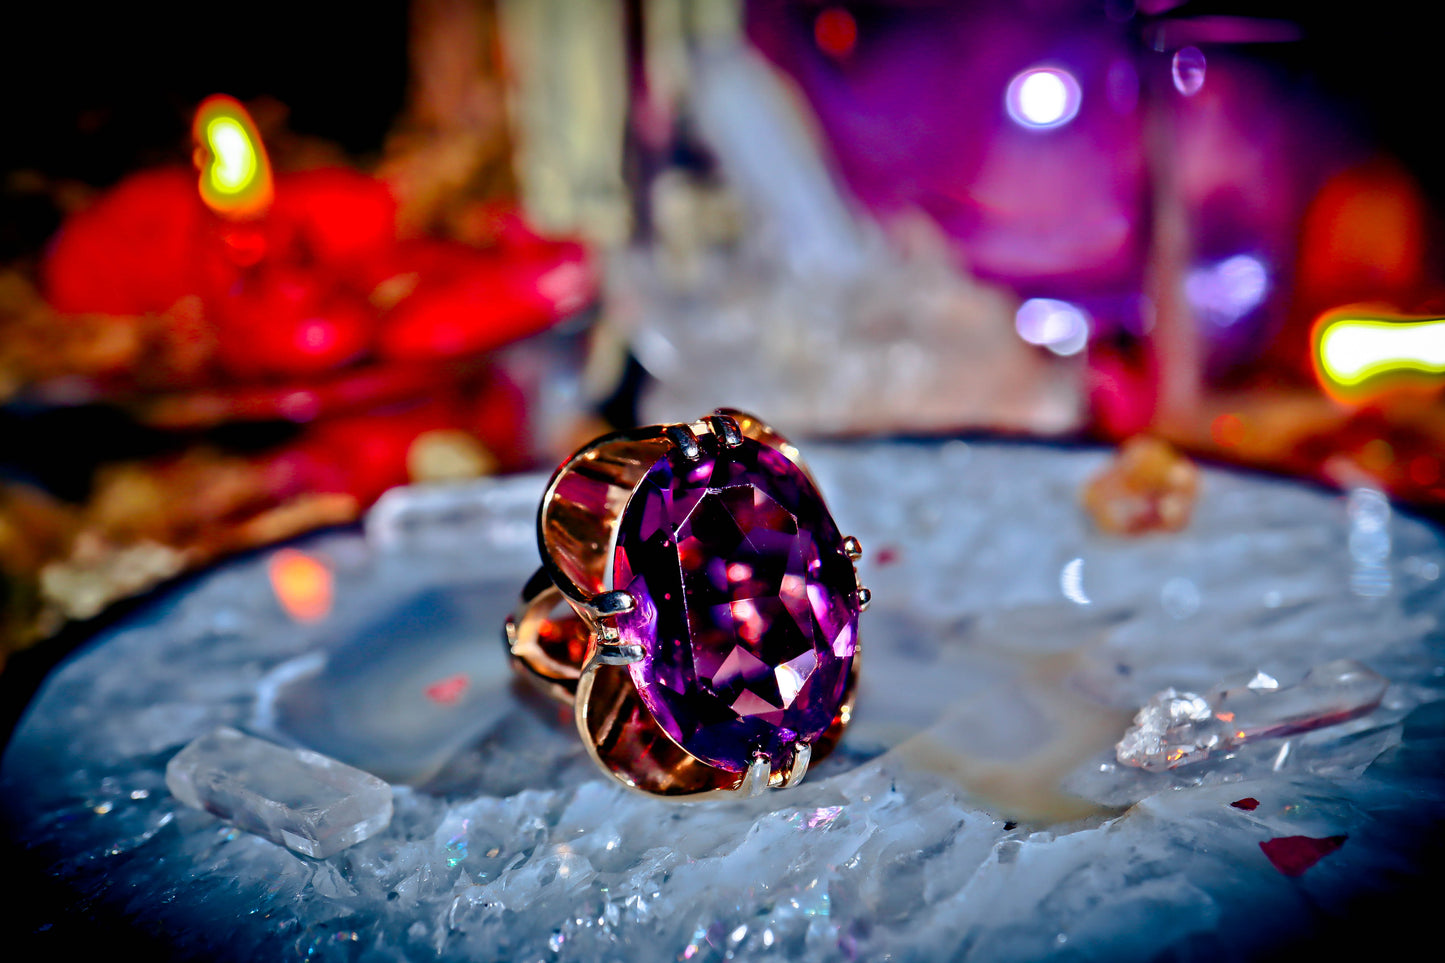 **POWERFUL** GENDER SHAPRESHIFT Charm Ring! Change Your Gender Shapeshifting Beauty Spell Haunted Ring LGBTQ Magick Occult Real Power + Happiness & Blessings! * RARE $$ ~ Love! MEGA POWER X3!